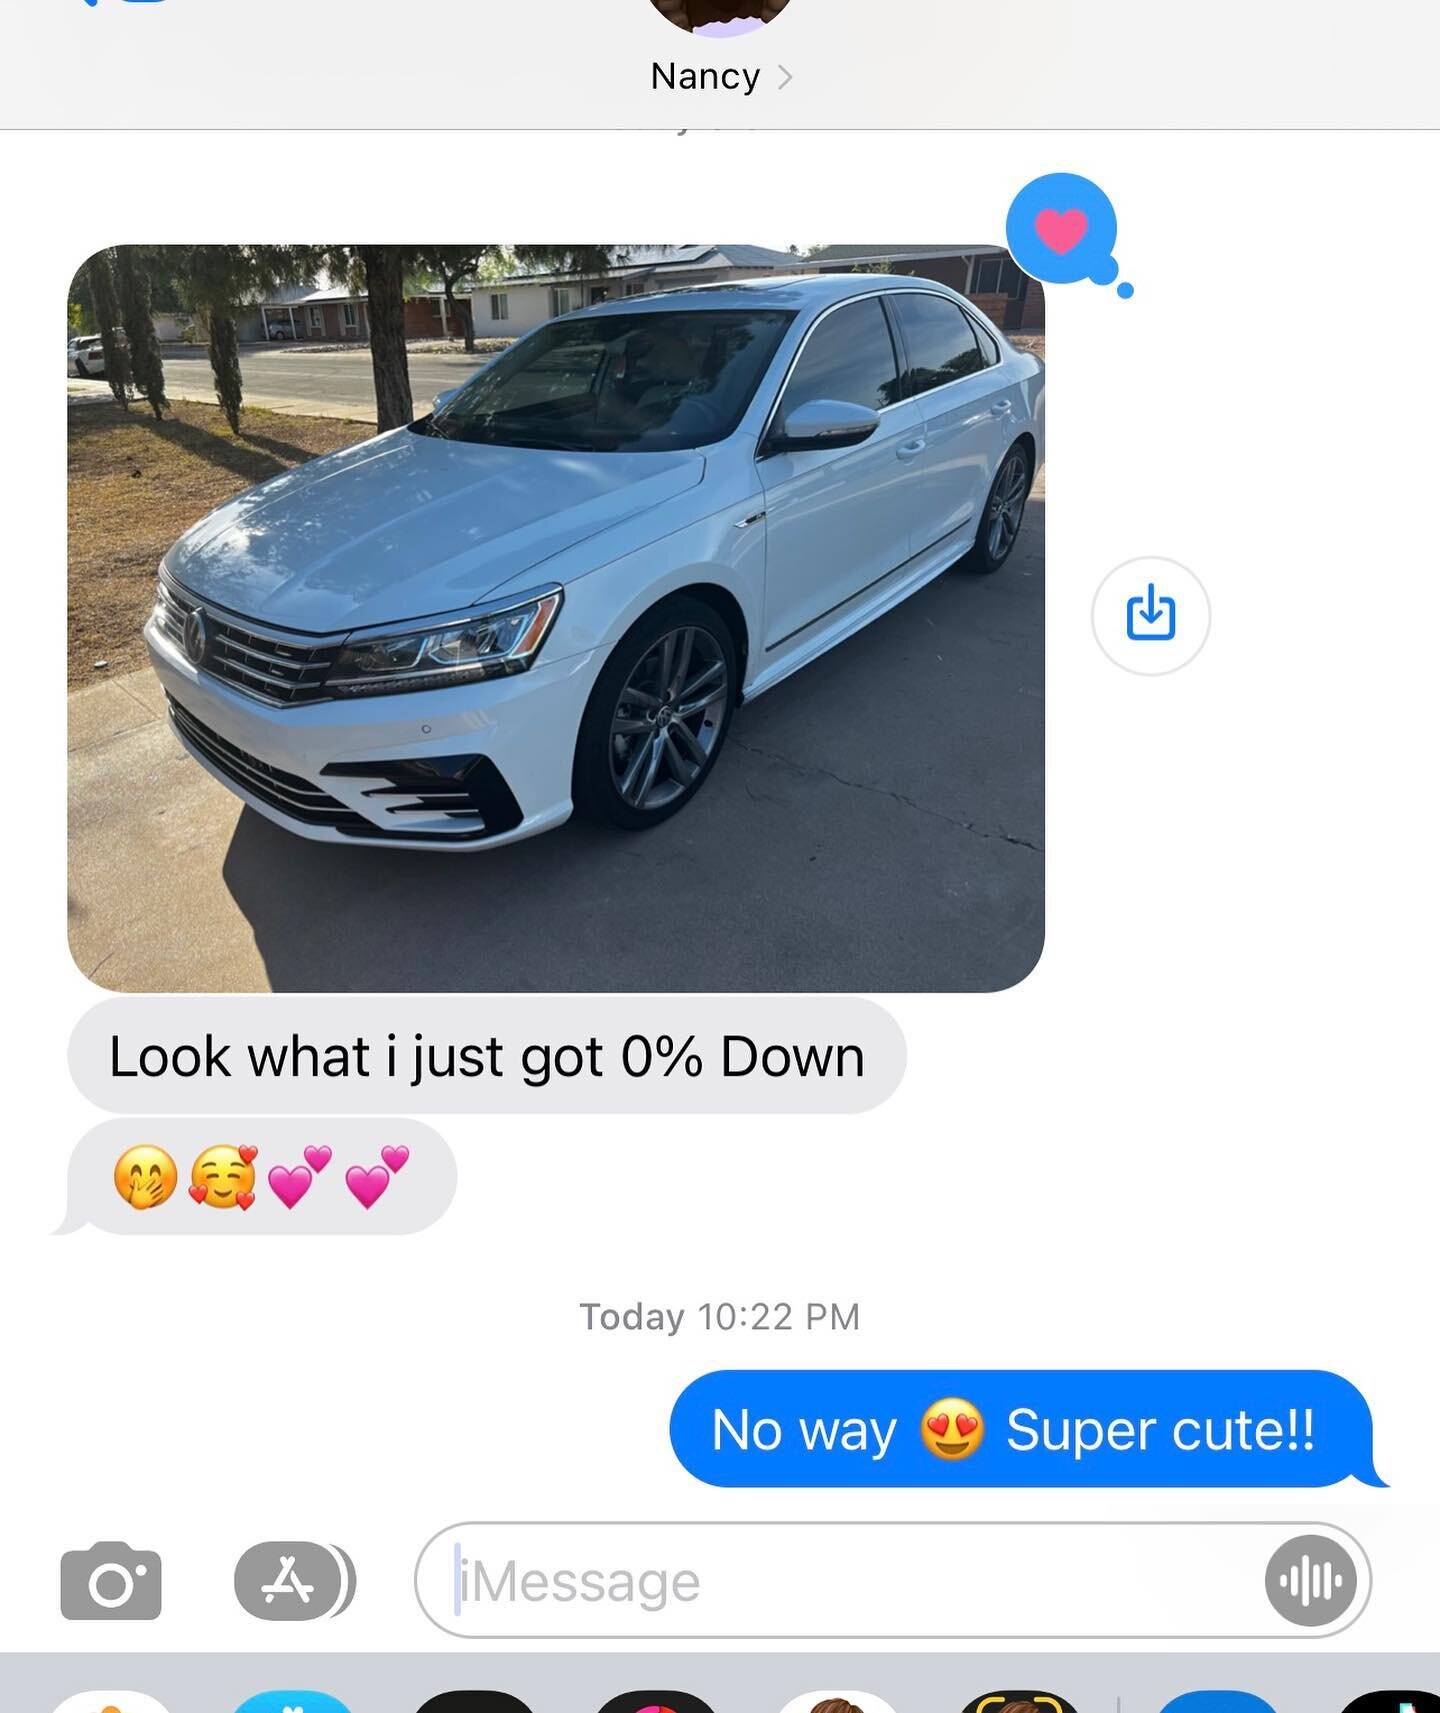 Another Successful Purchase 🚗 🎉
After getting rid of thousands of dollars in debt she was able to get her new car with 0% down!
Congrats Nancy ❣️